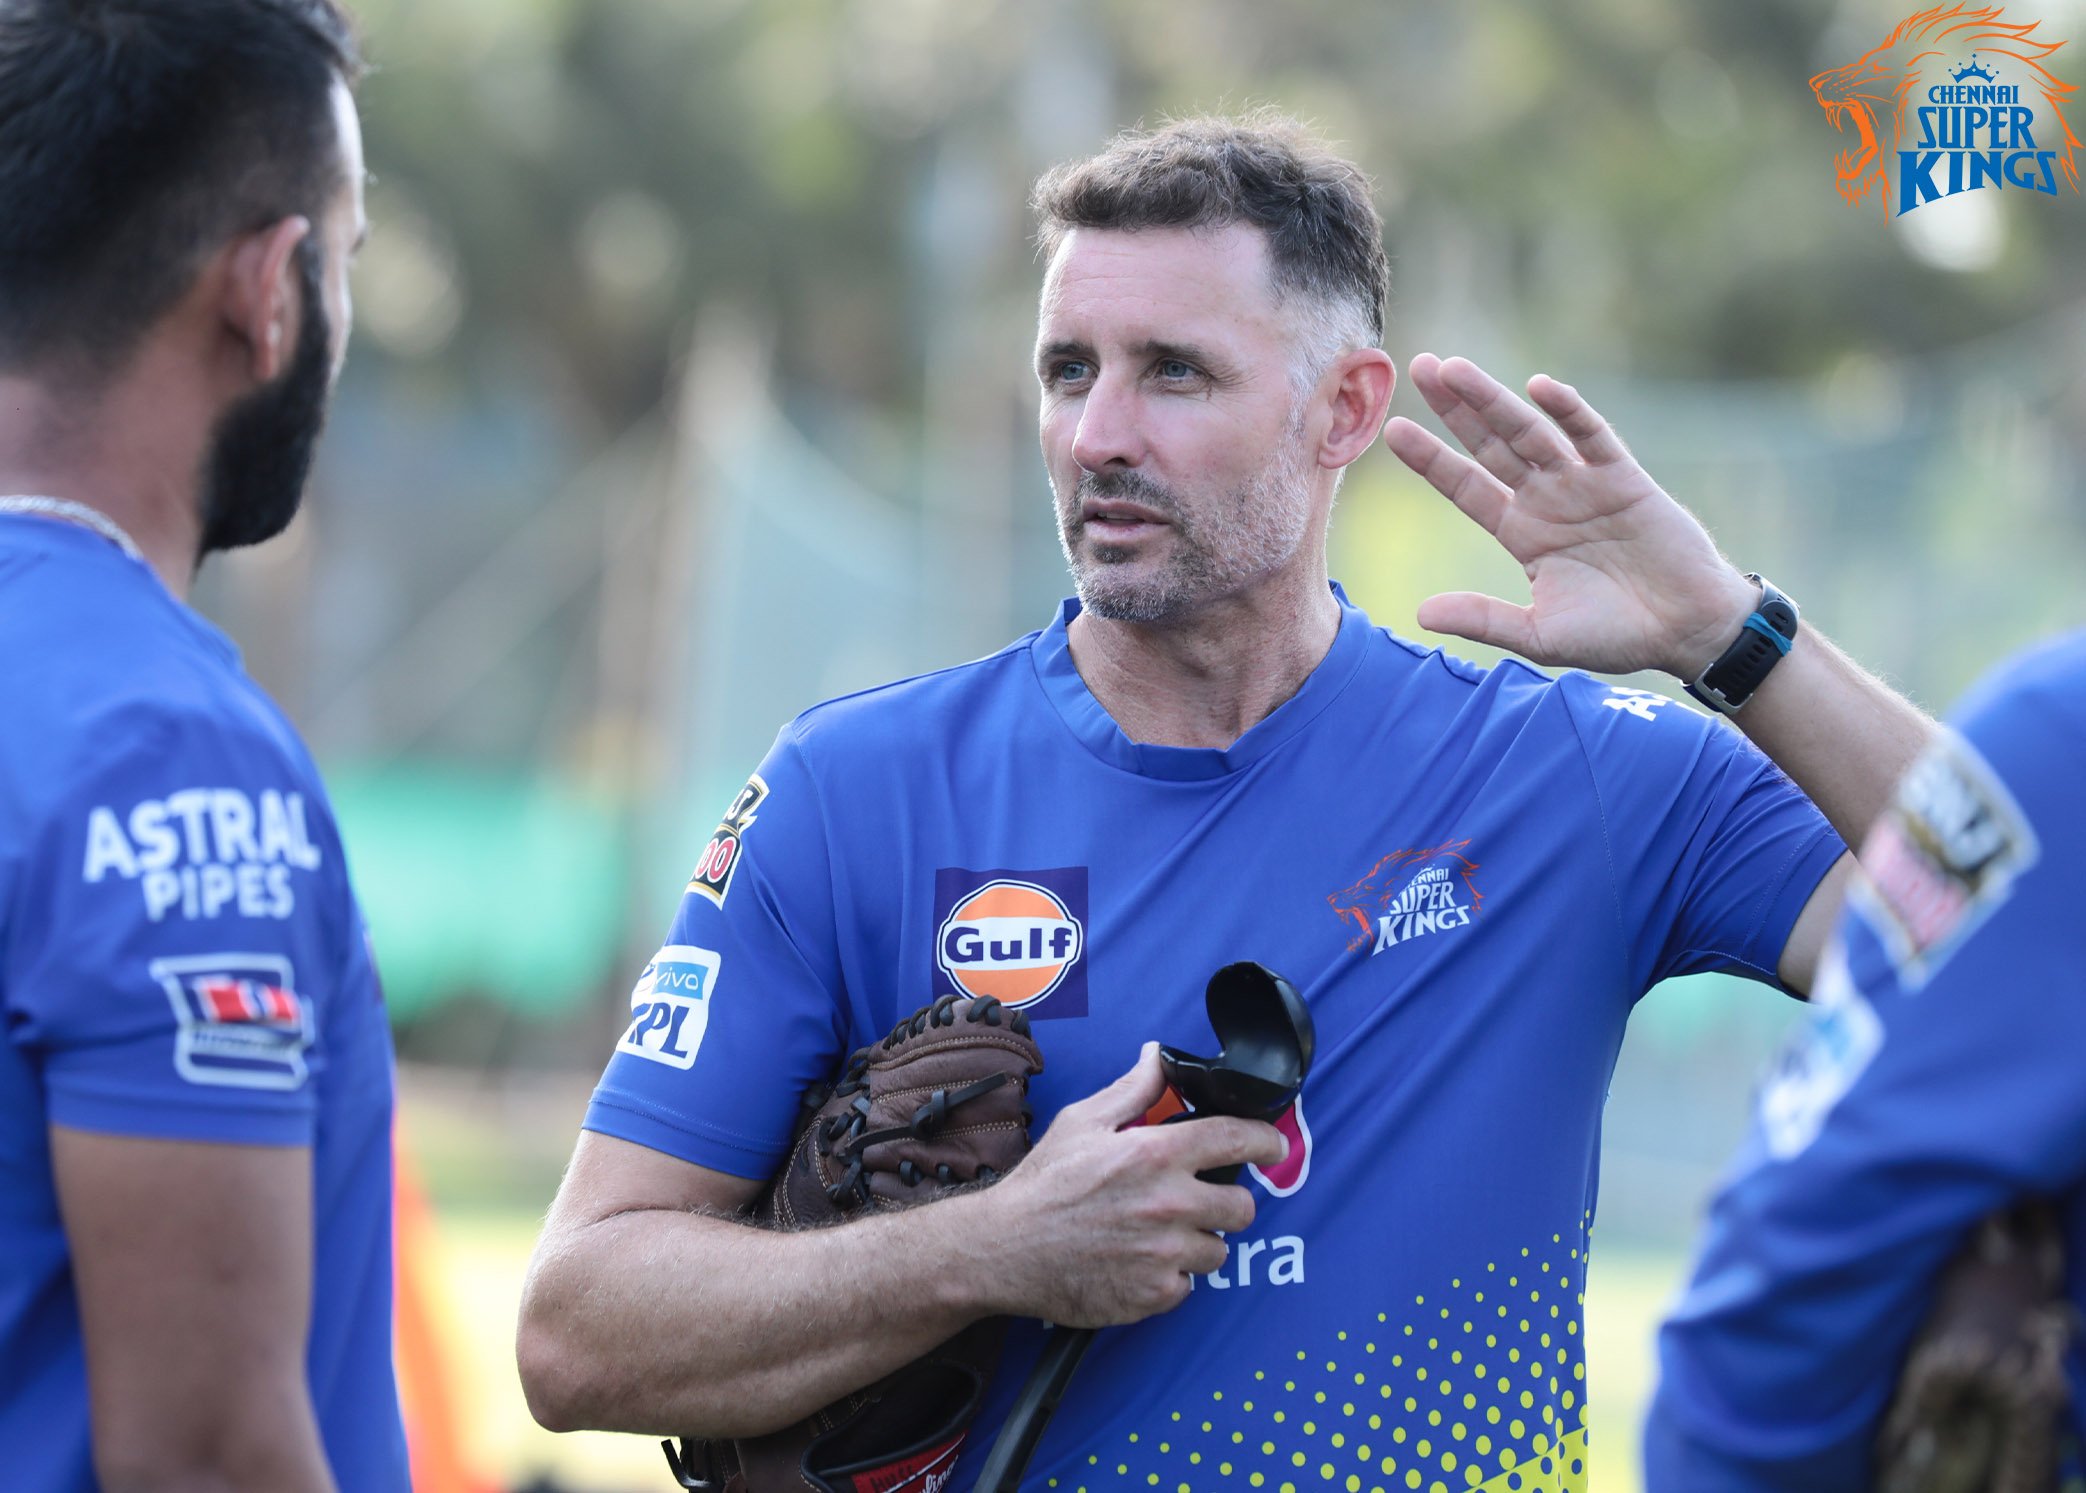 CSK batting coach Michael Hussey tests positive for Covid19